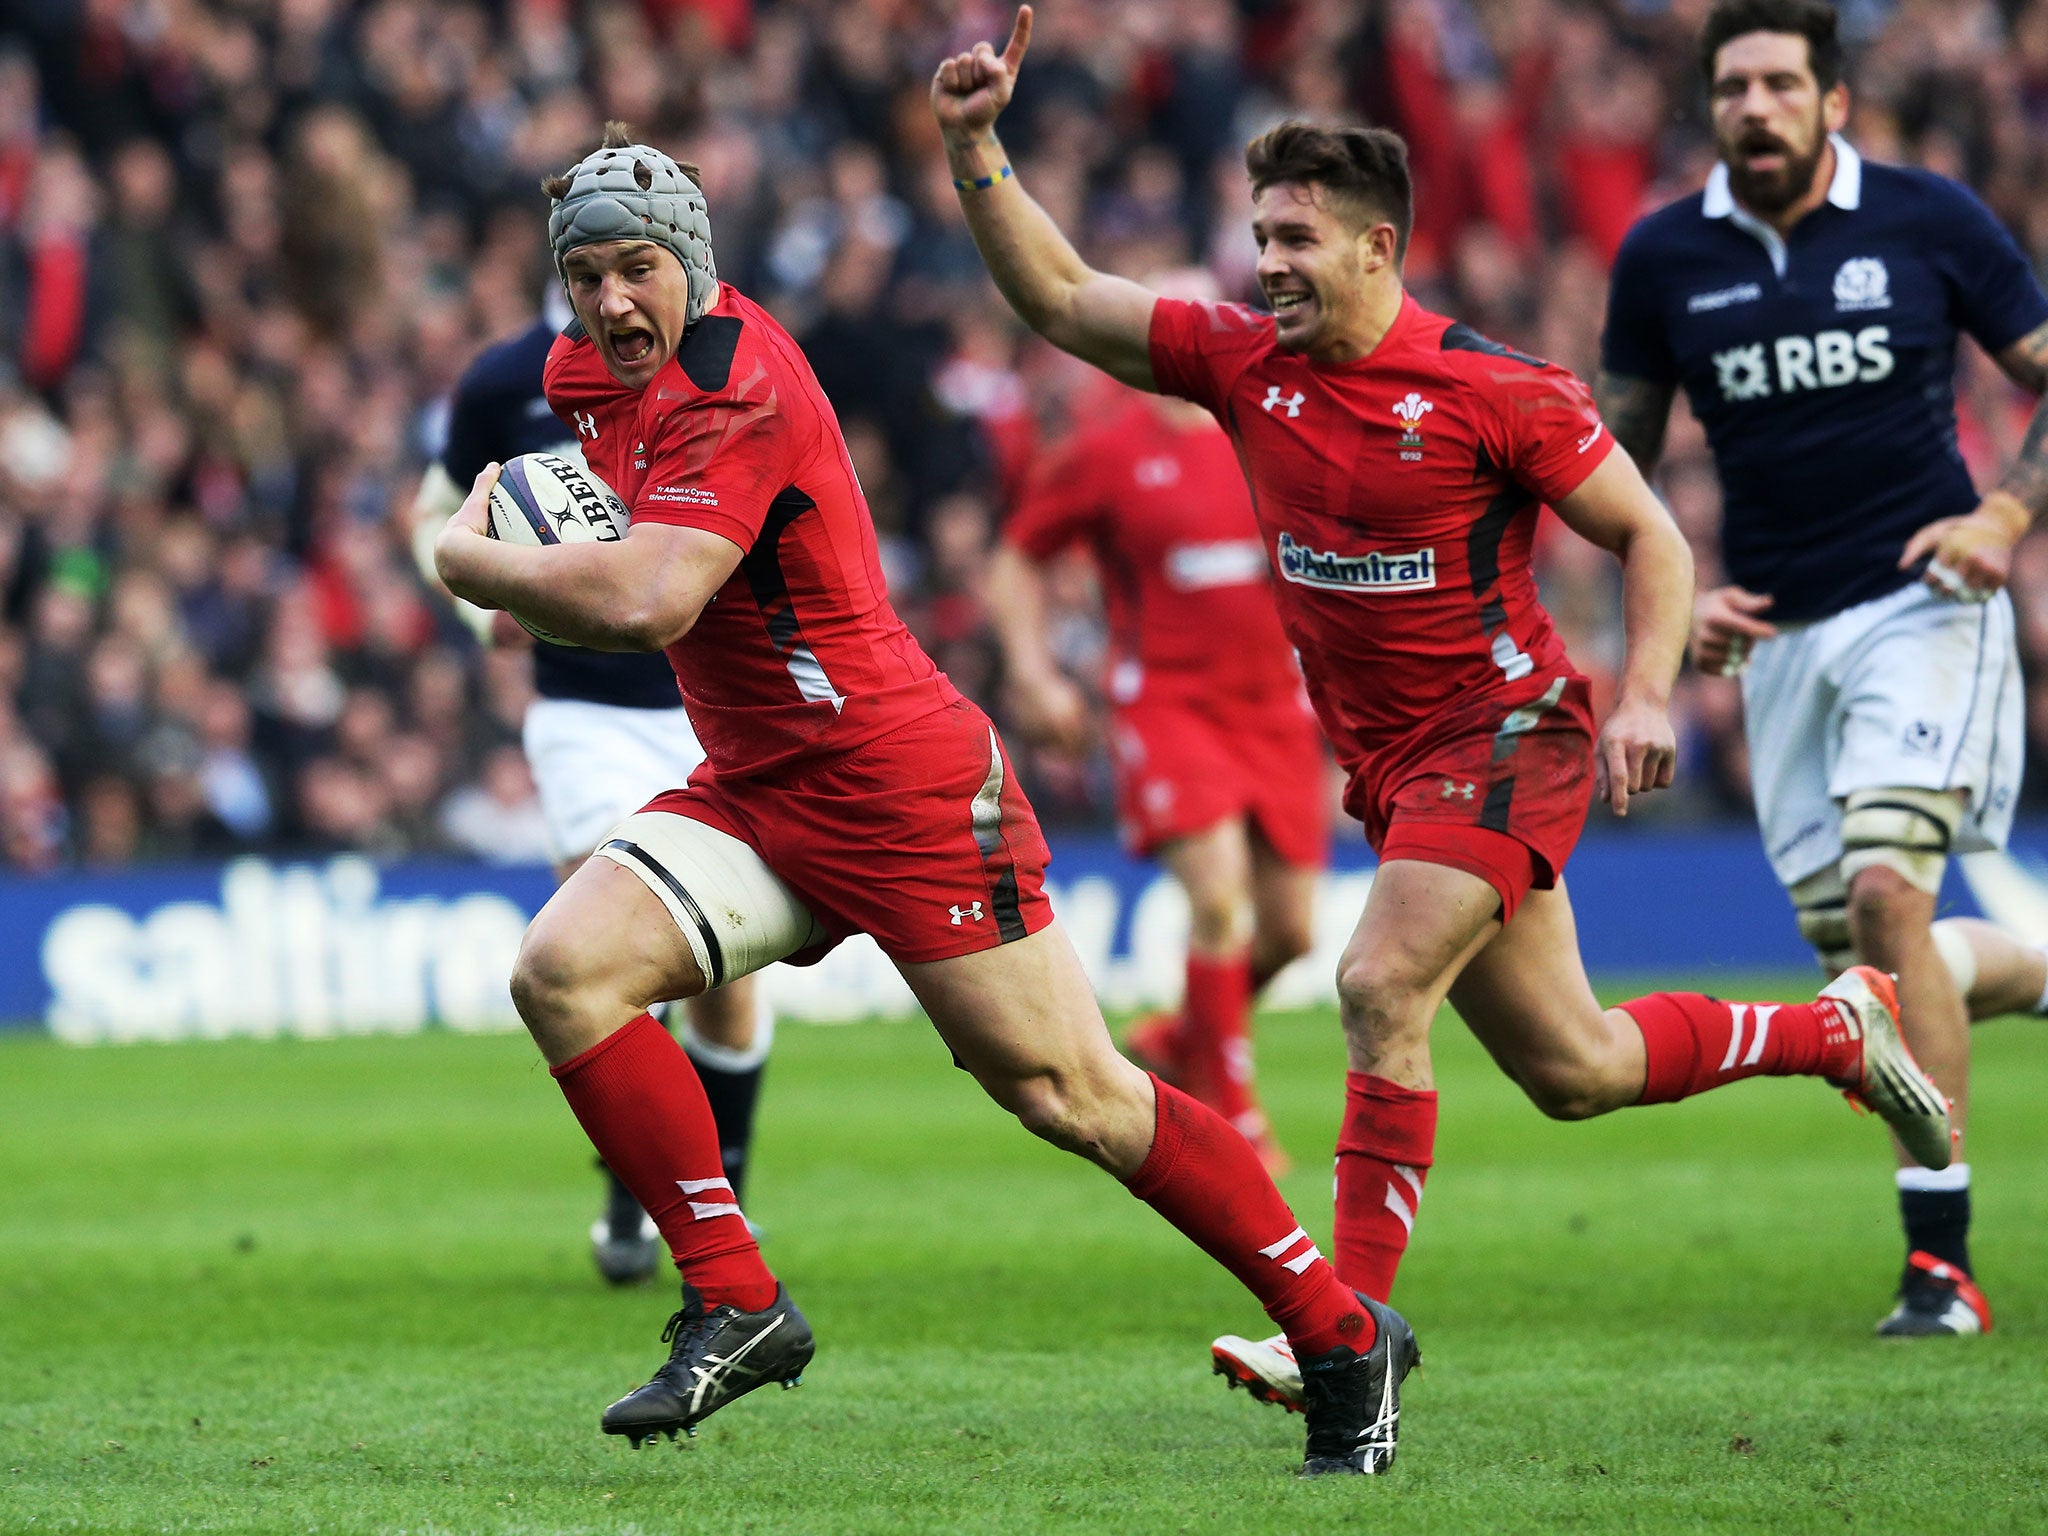 Jonathan Davies, of Wales, scores his team’s second try as team-mate Rhys Webb celebrates